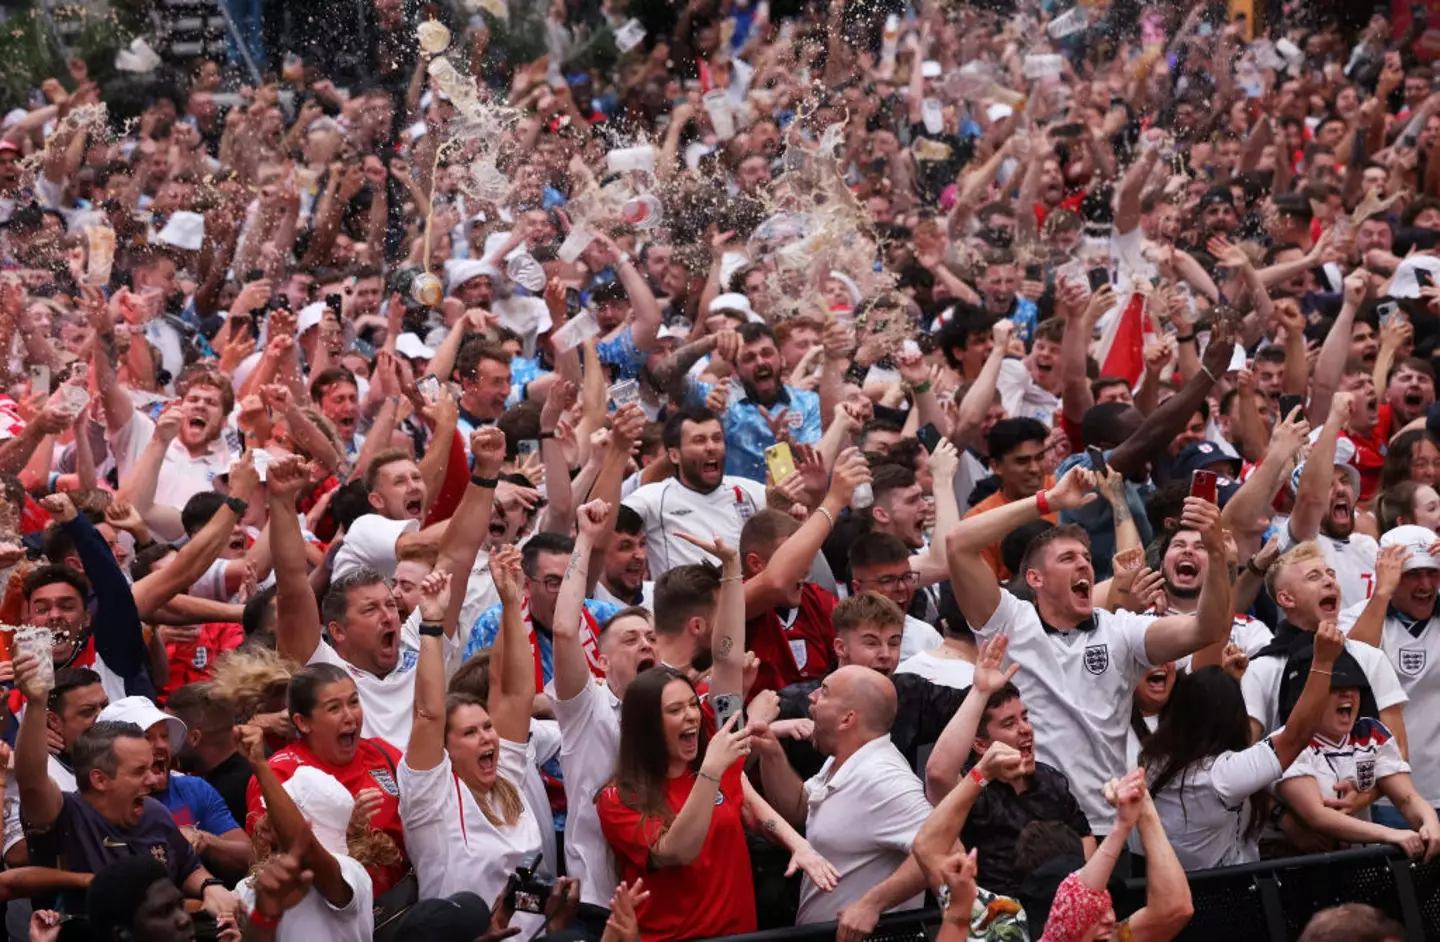 England fans hope it will come home on Sunday night (Dan Kitwood/Getty Images)